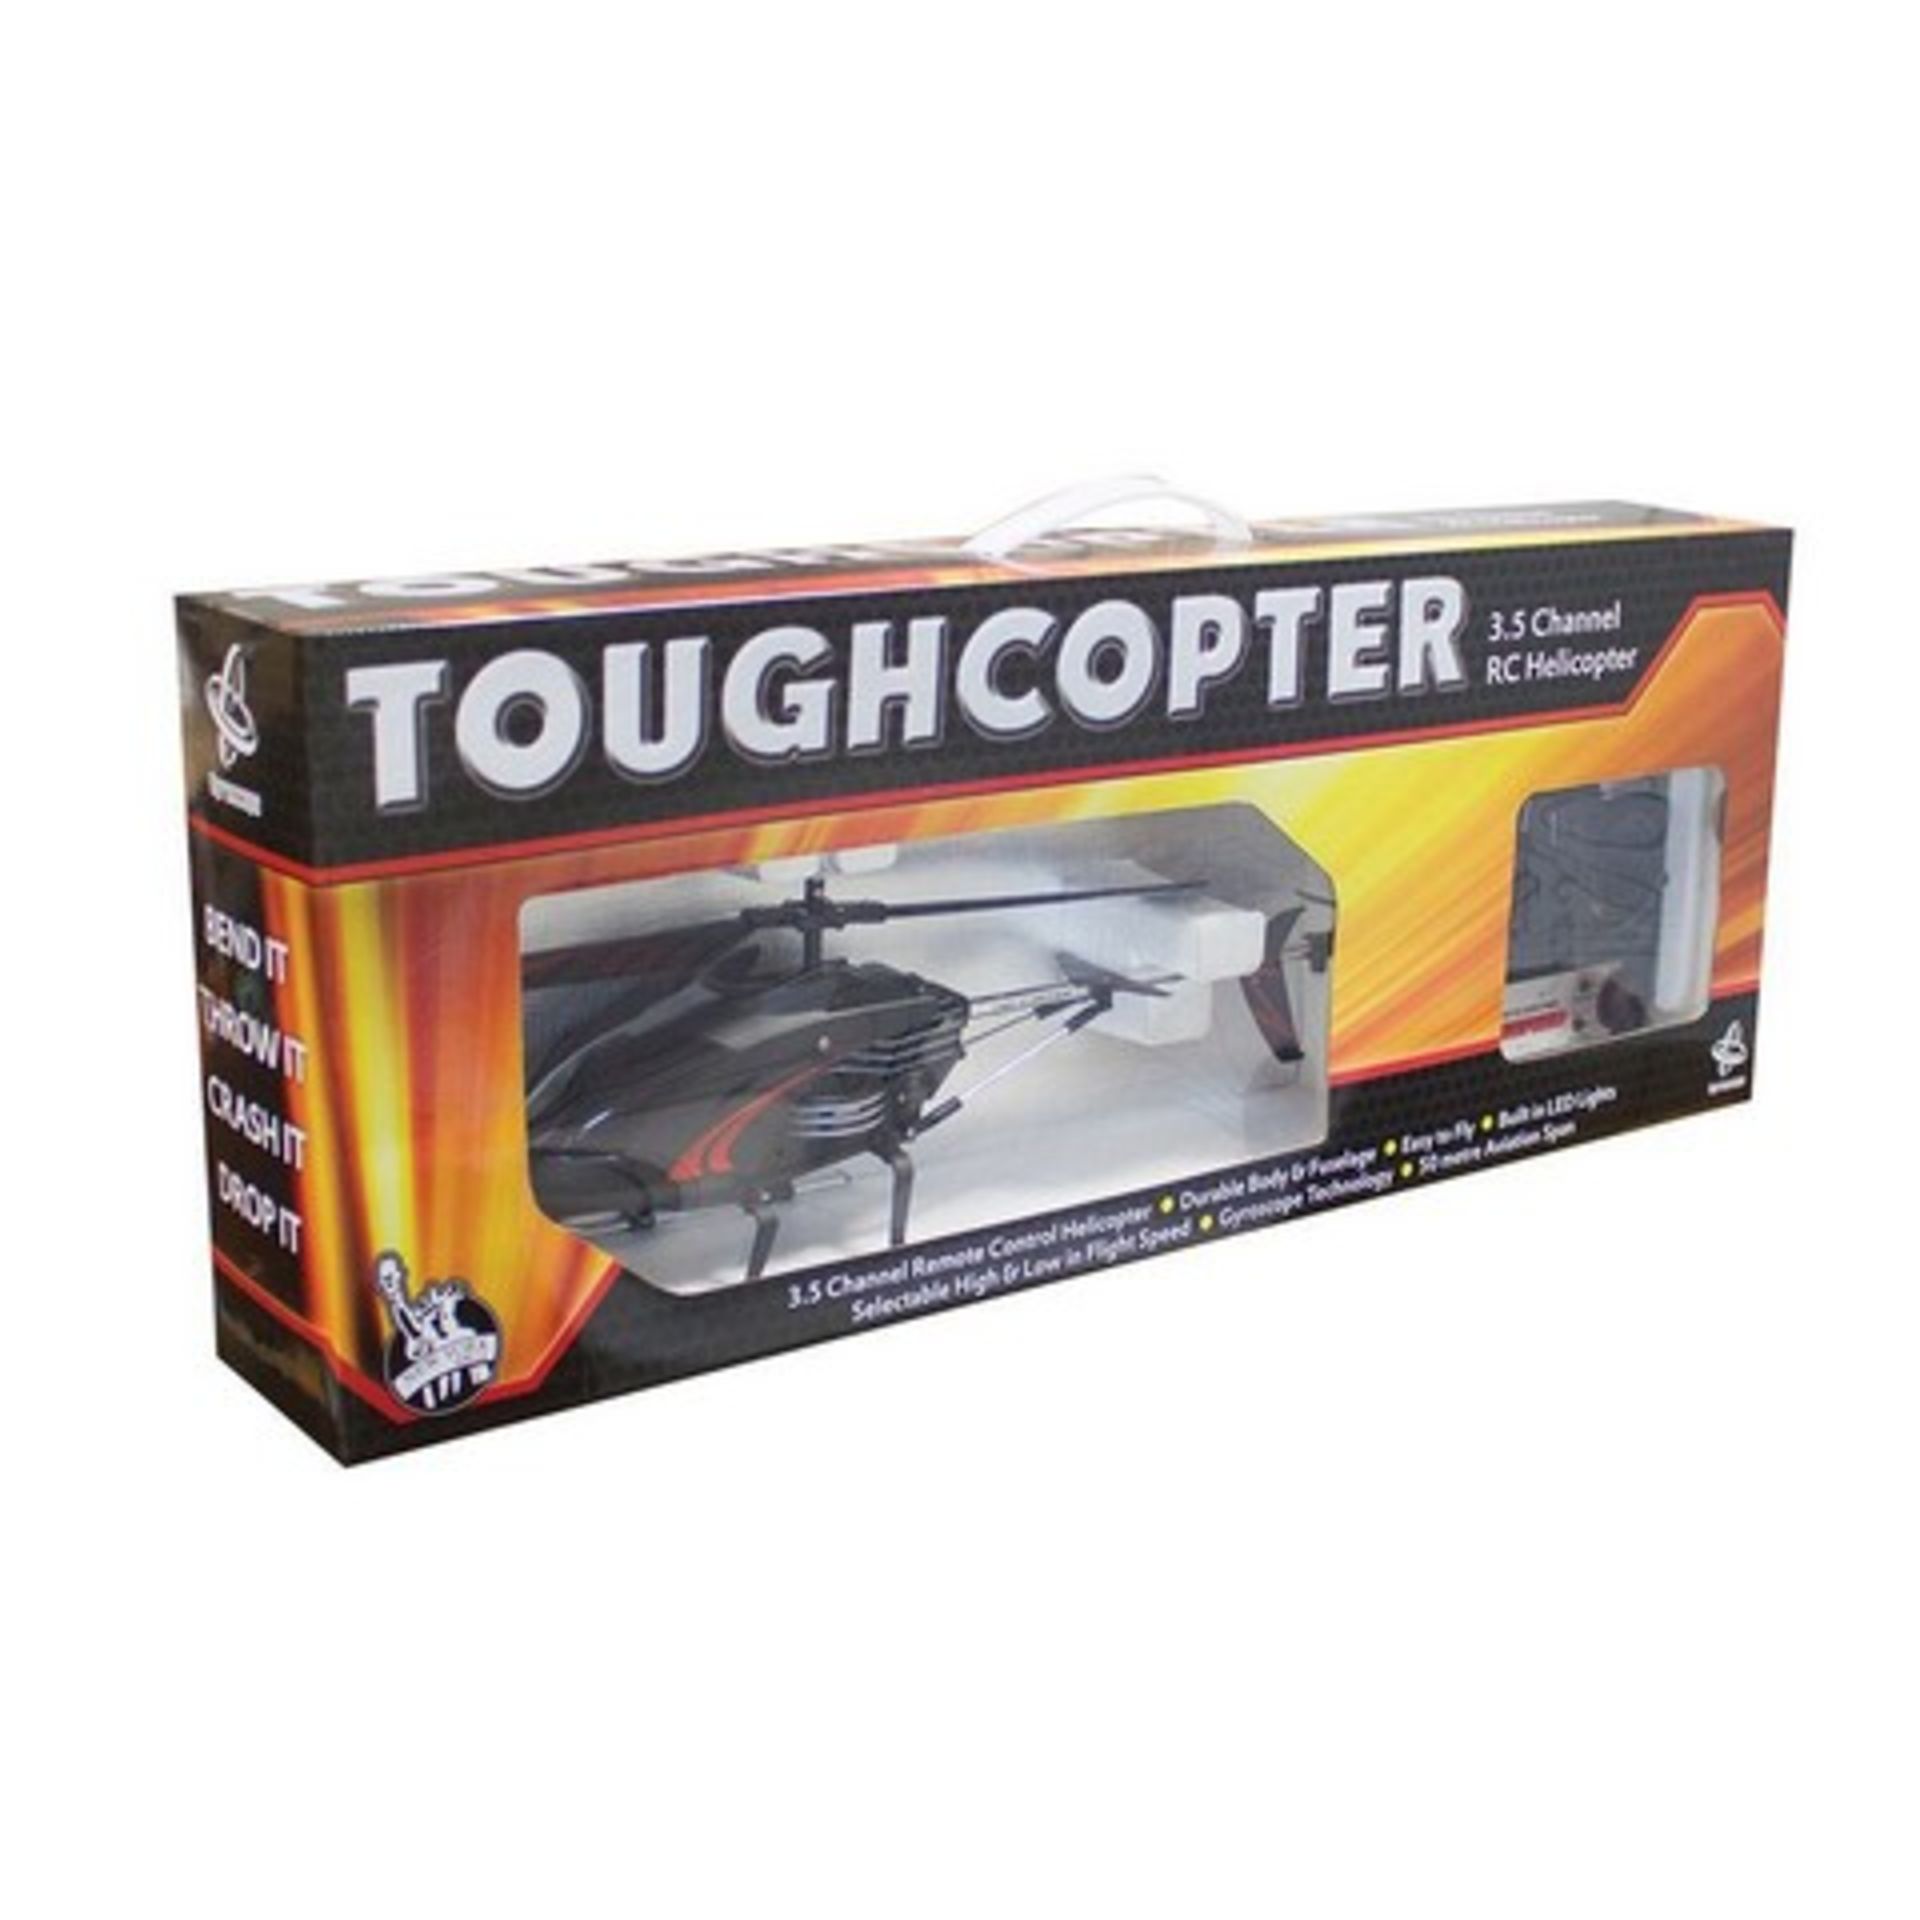 V Brand New Toughcopter 3.5 Channel R/C Helicopter With 3.0 Channel - Durable Body & Fuselage - - Image 2 of 2